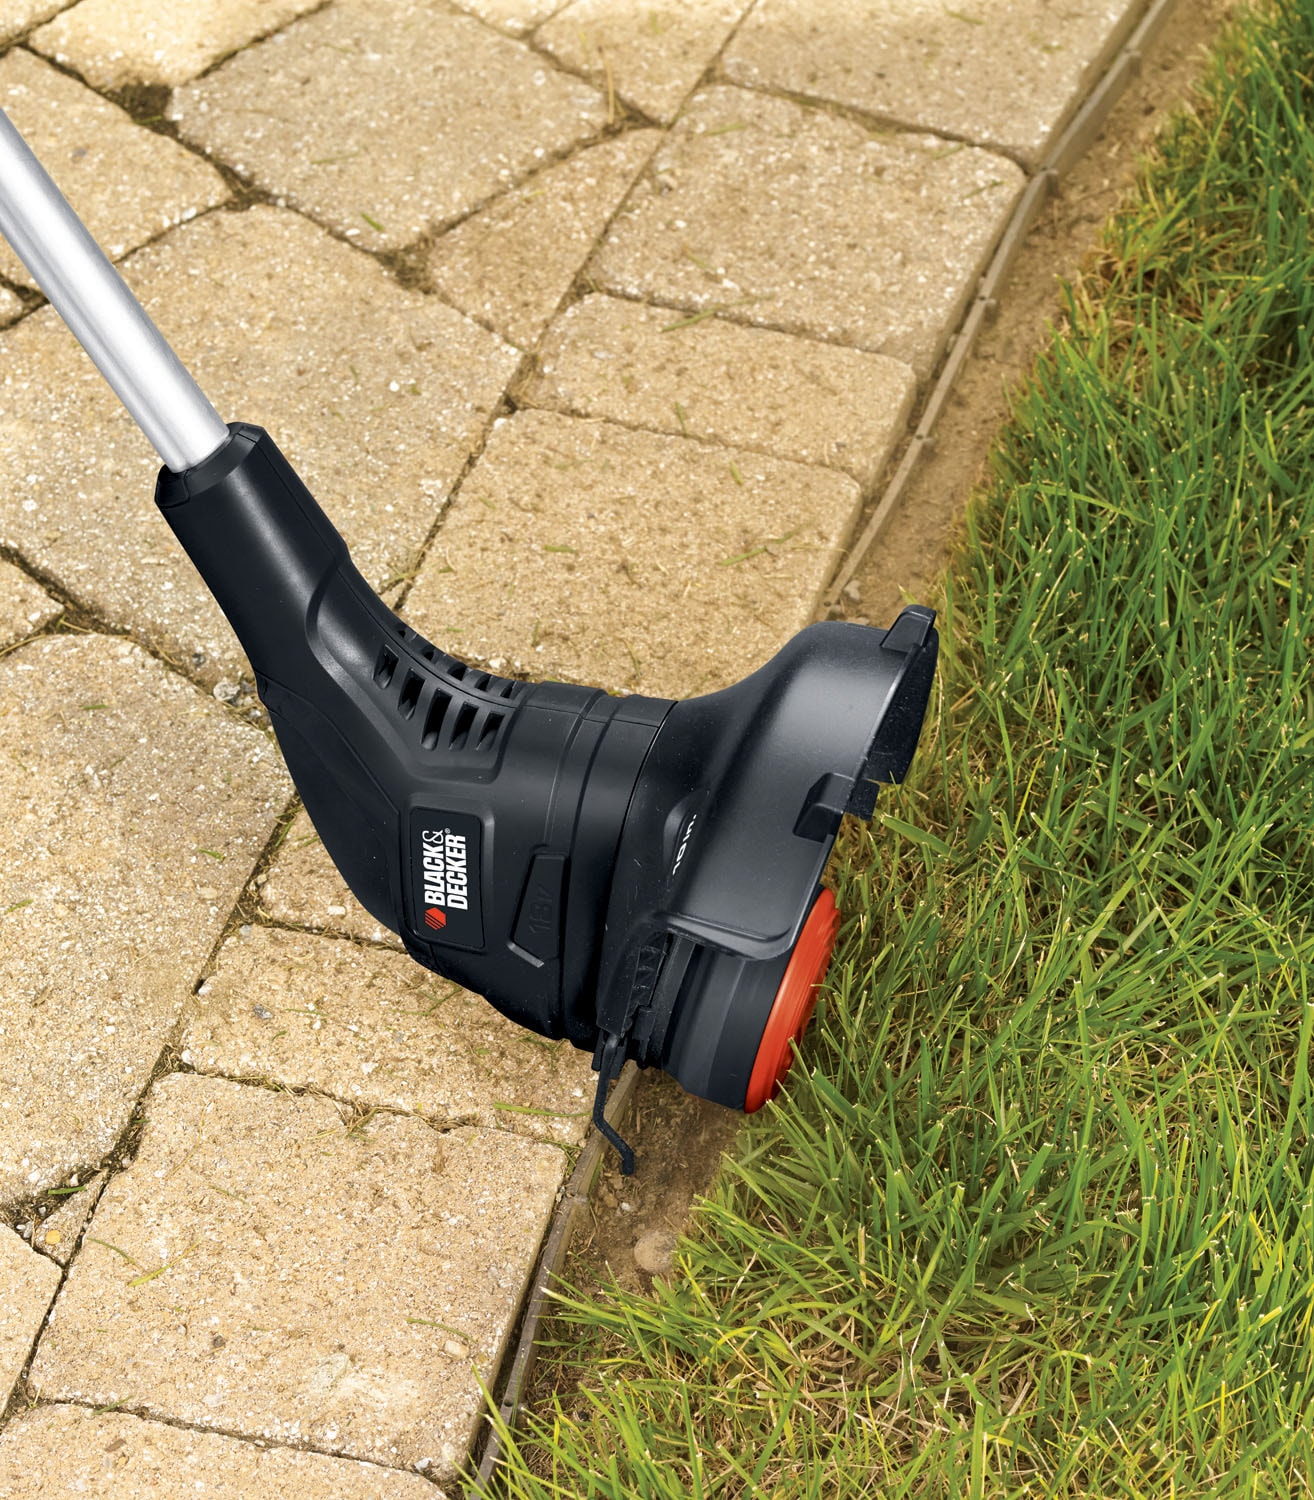 Black and Decker Hedgehog Trimmer NHT518 Preview